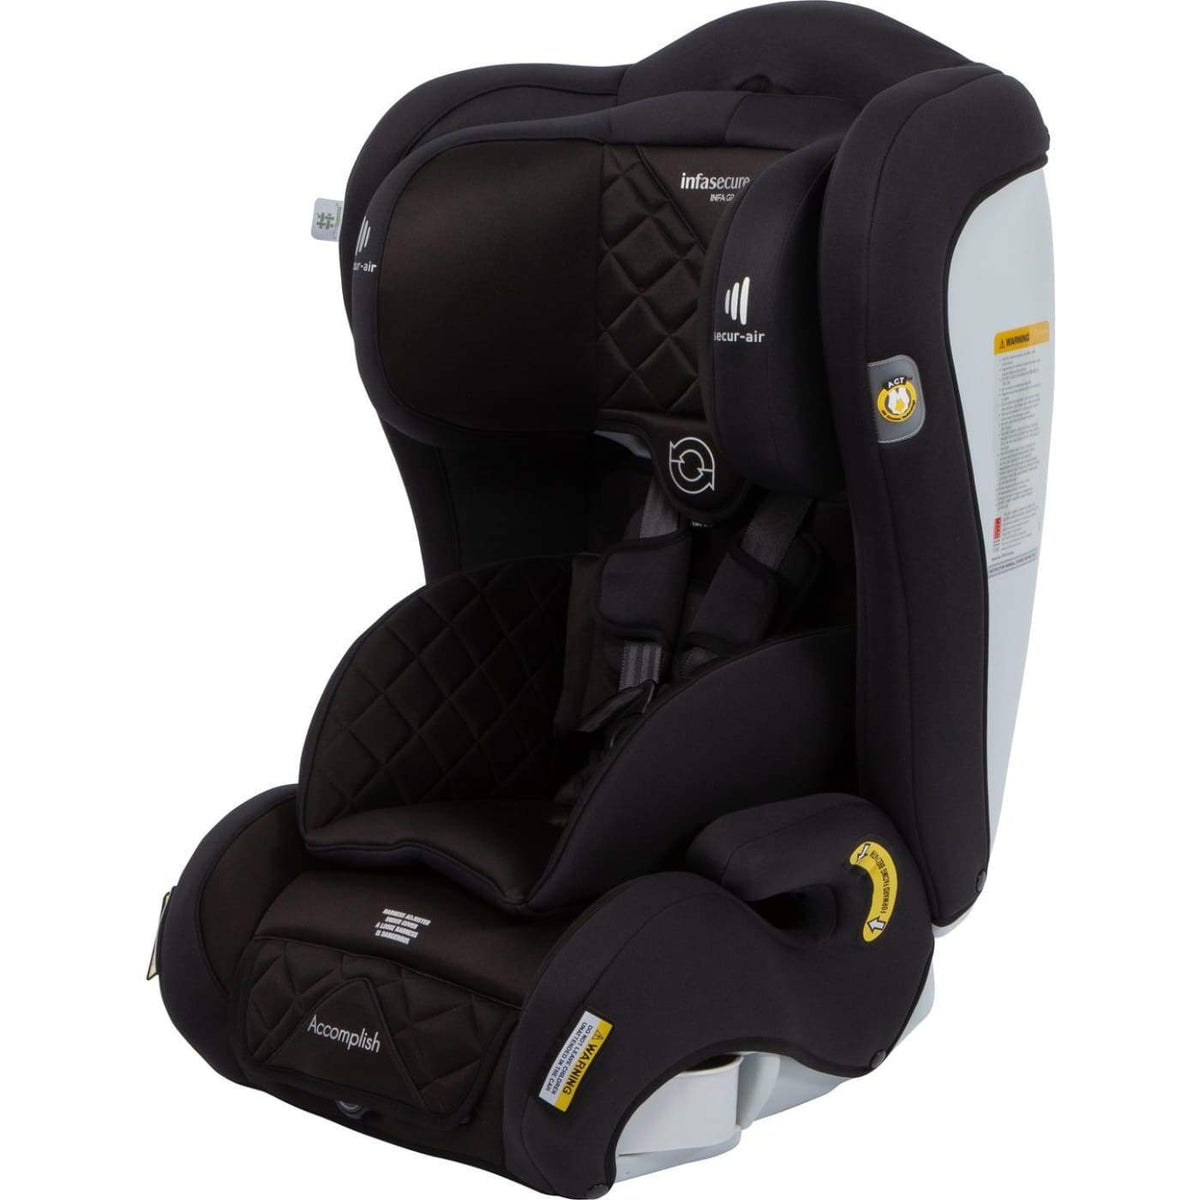 Infascure Accomplish Premium More Forward Facing Harness Seat - Dusk 6M-8YR - Dusk - CAR SEATS - HARNESSED BOOSTERS (6M-8YR)